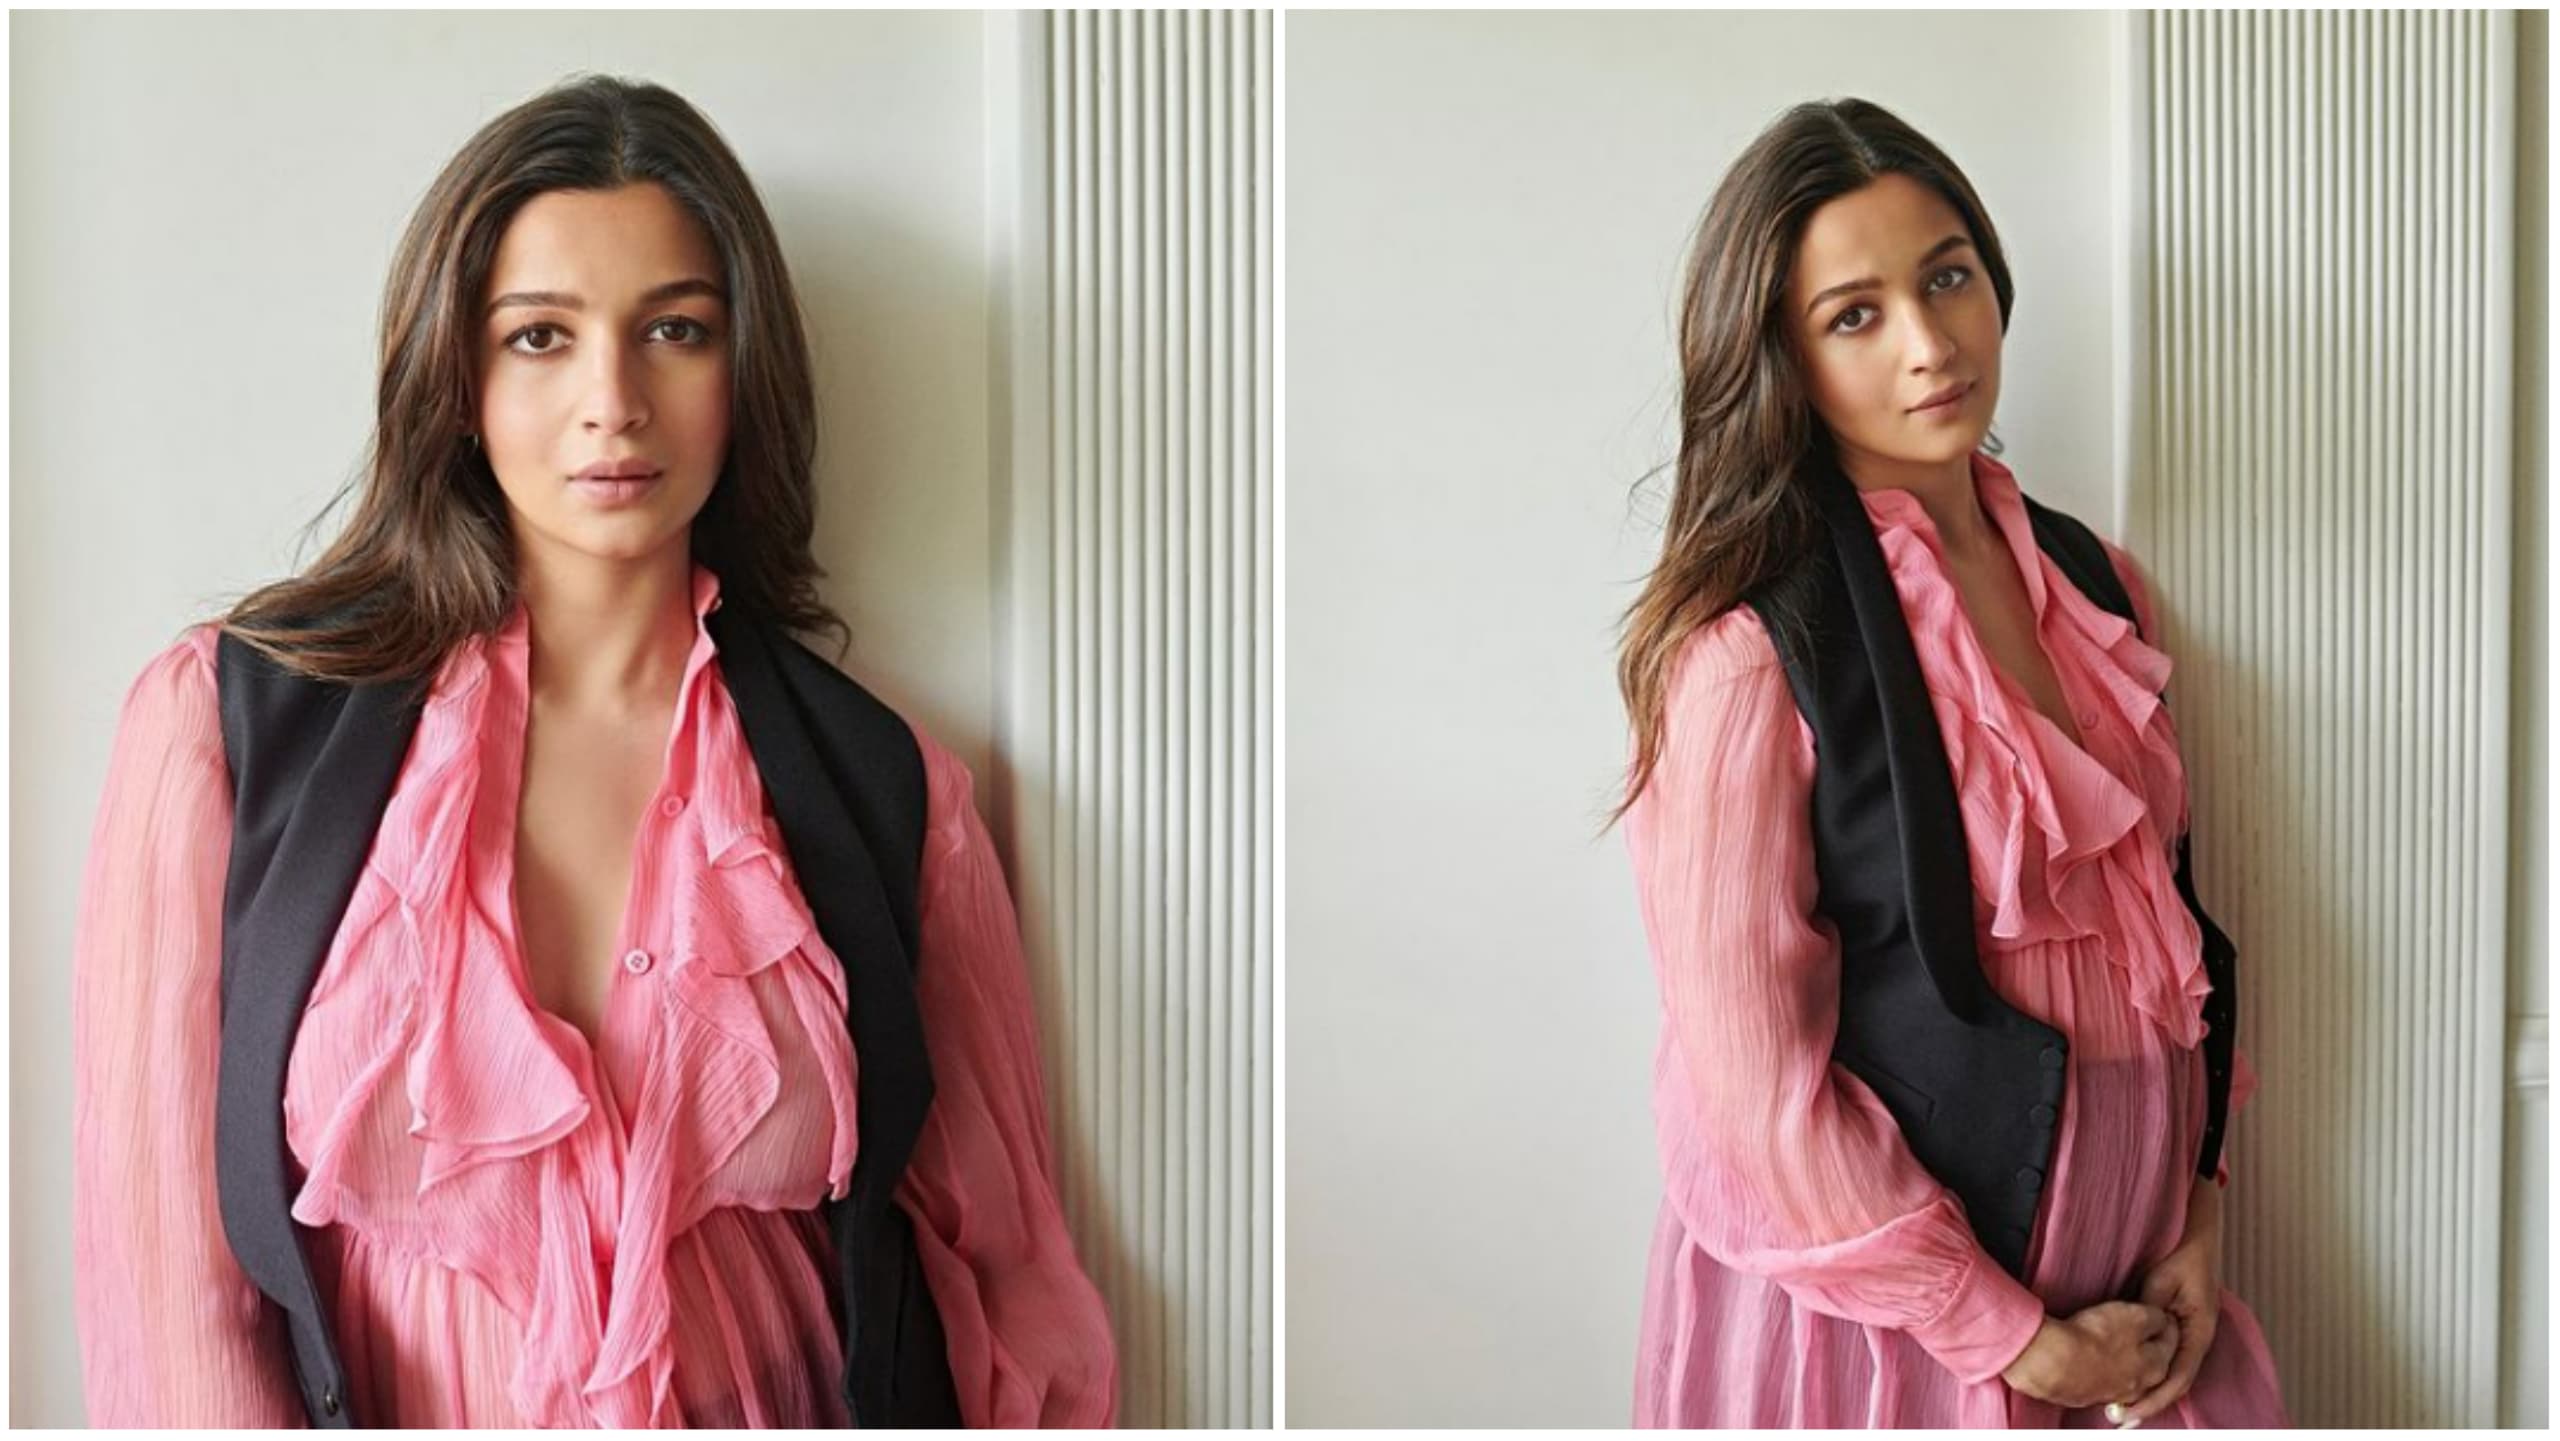 Alia Bhatt shared new pictures on her Instagram account.